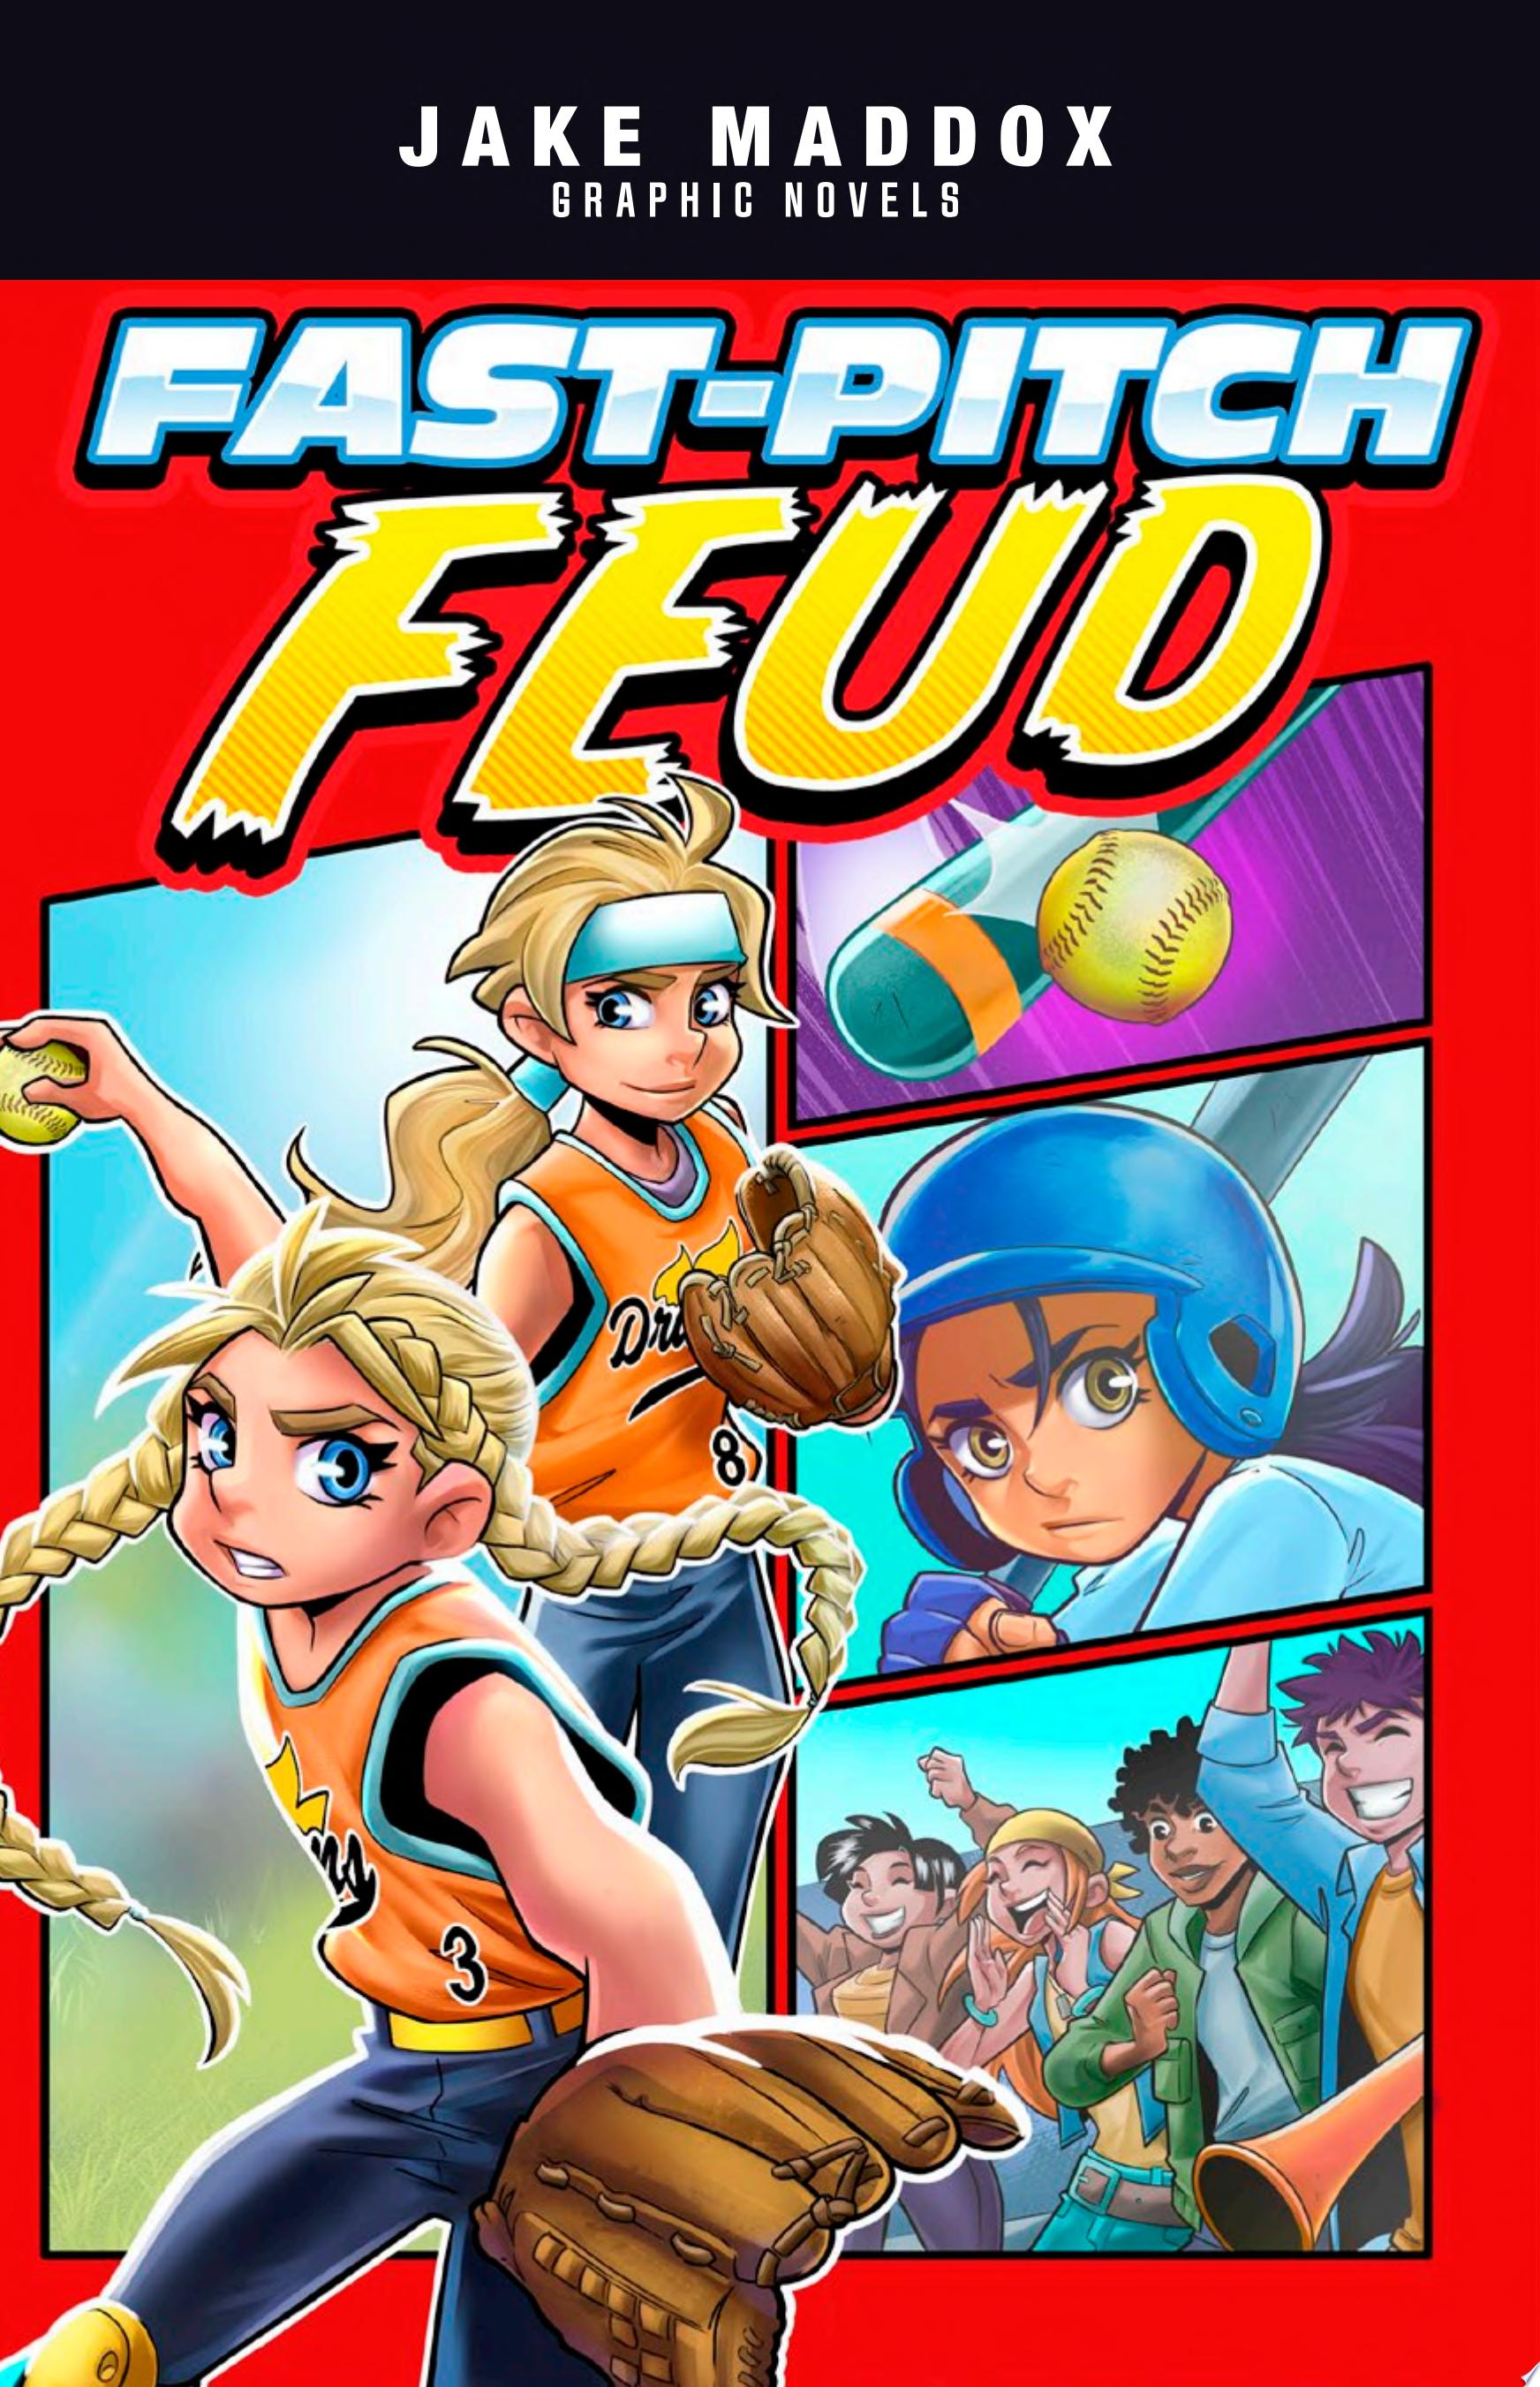 Image for "Fast-Pitch Feud"